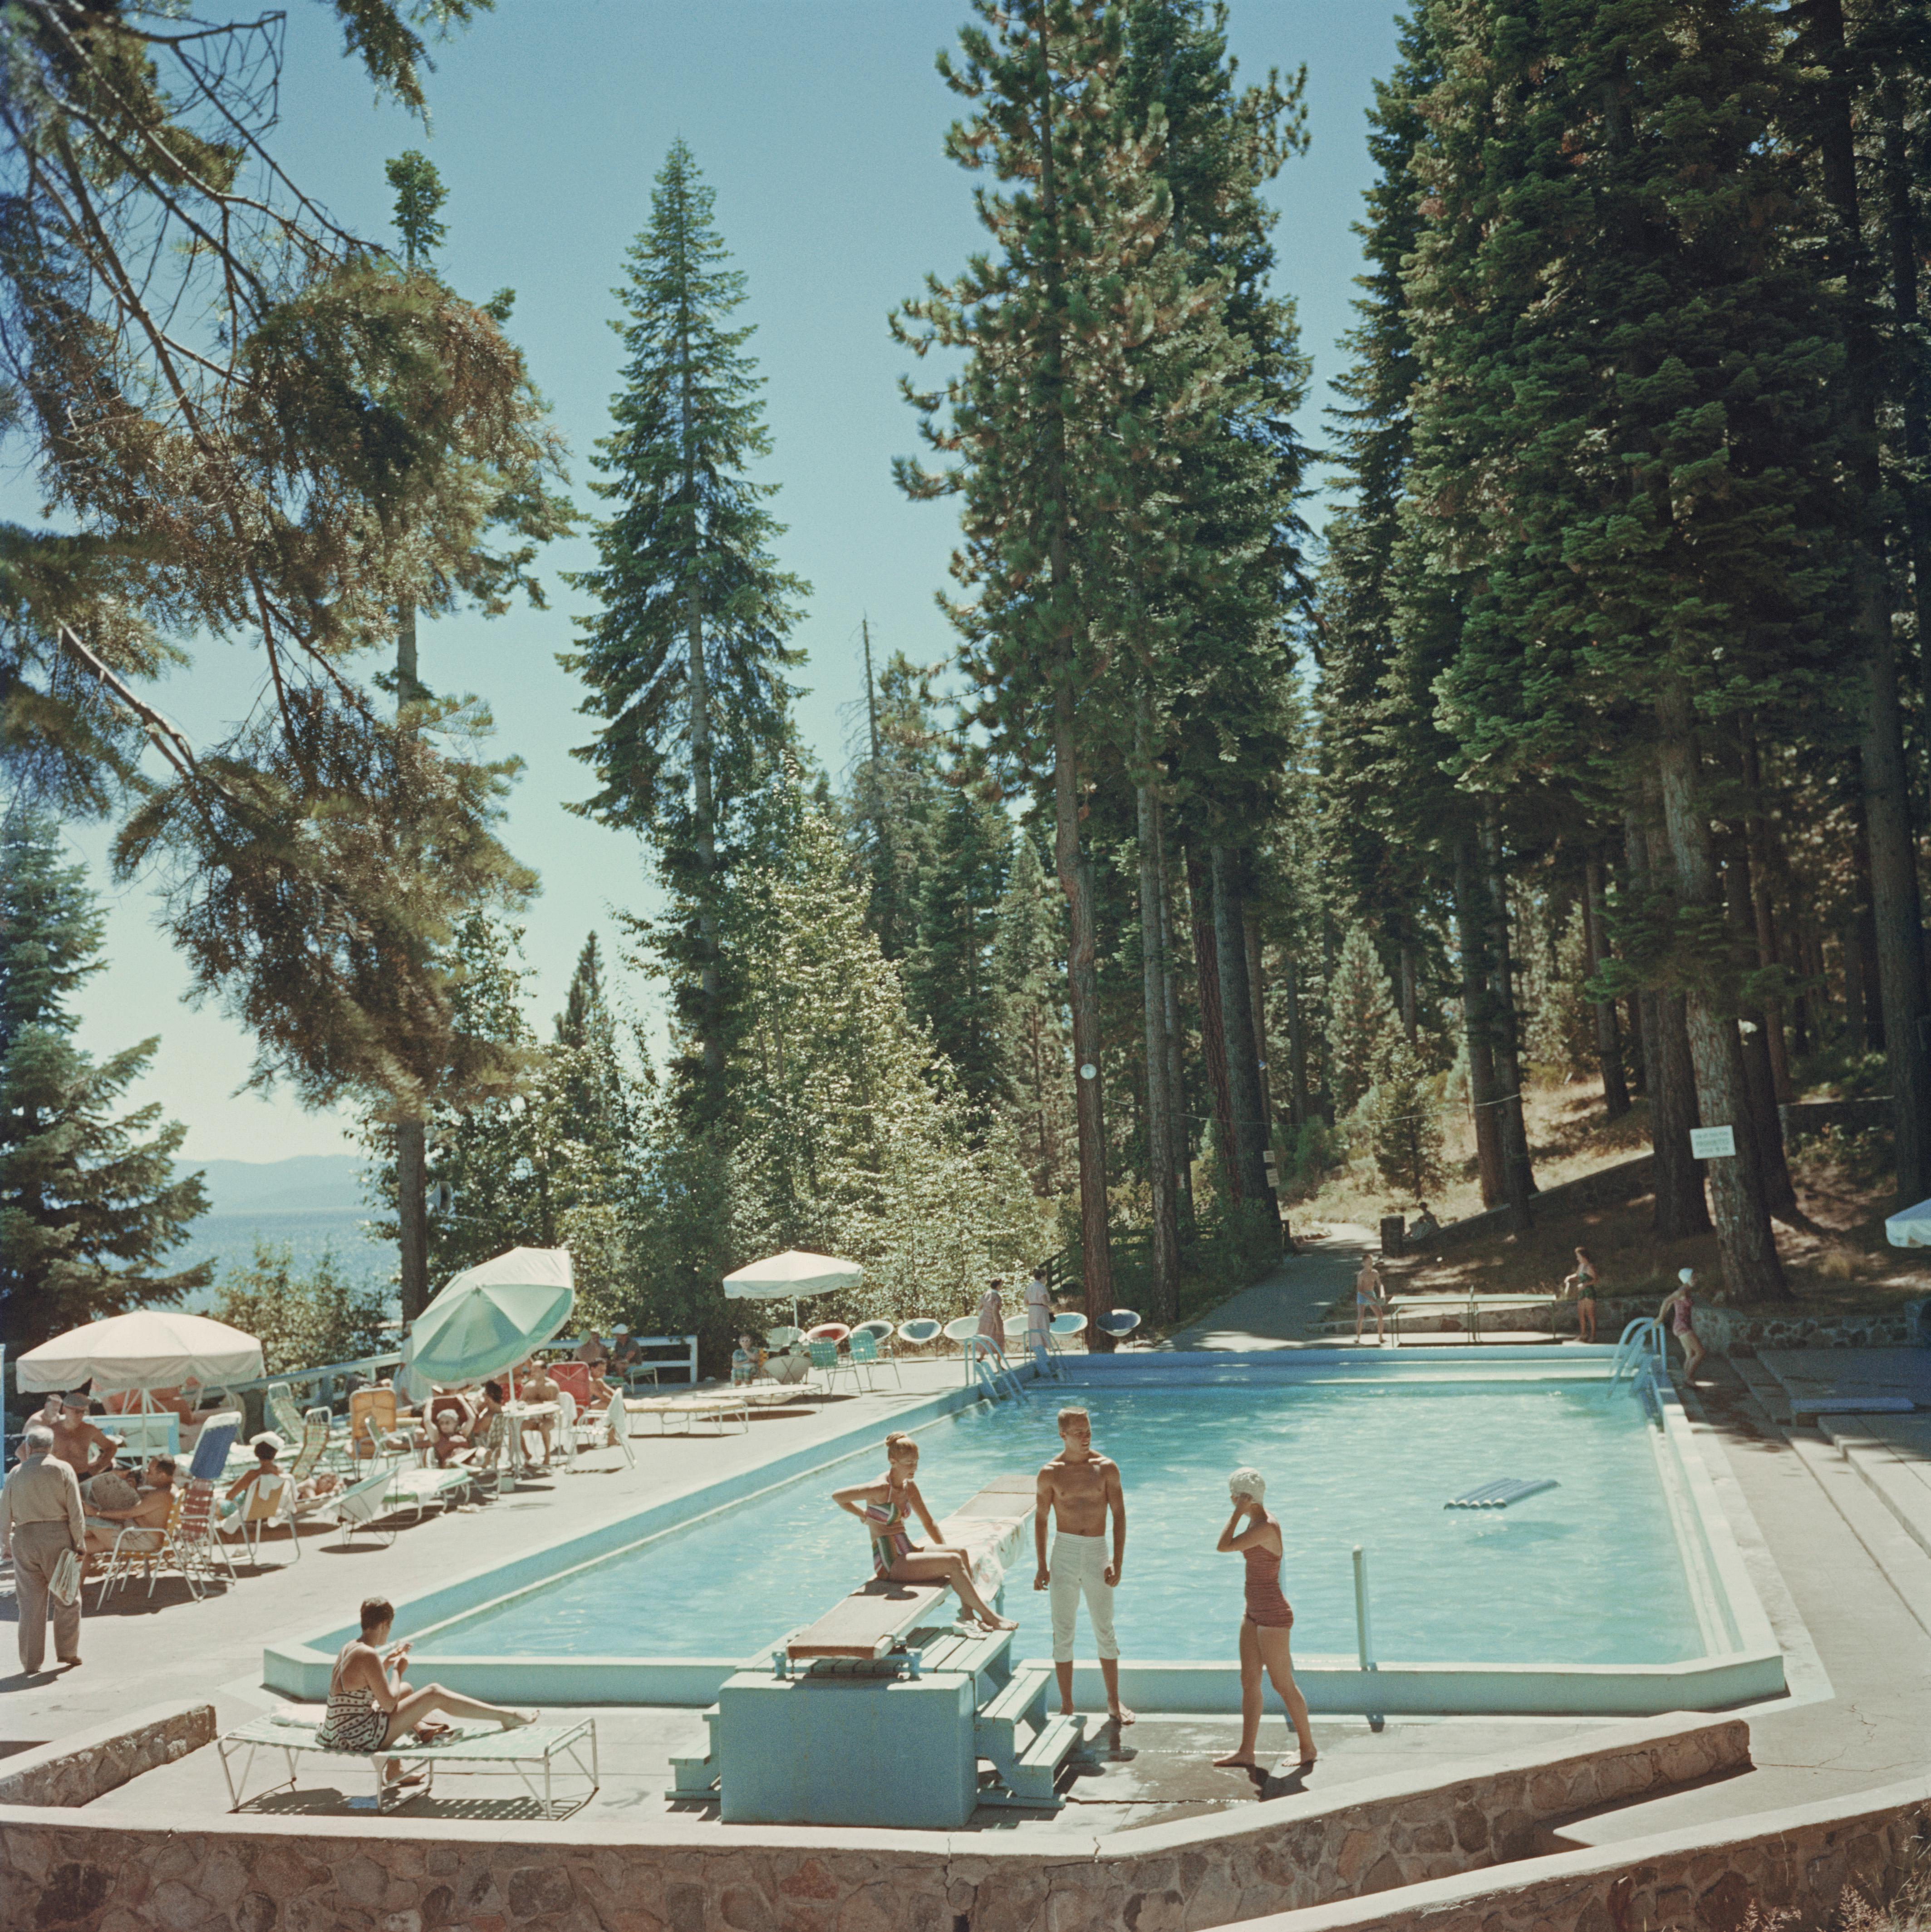 Slim Aarons
Pool At Lake Tahoe
1959 (printed later)
C print
Estate stamped and numbered edition of 150 
with Certificate of authenticity
Caption: Bathers by a pool at the Tahoe Tavern on the shore of Lake Tahoe, California, 1959.

Print is available